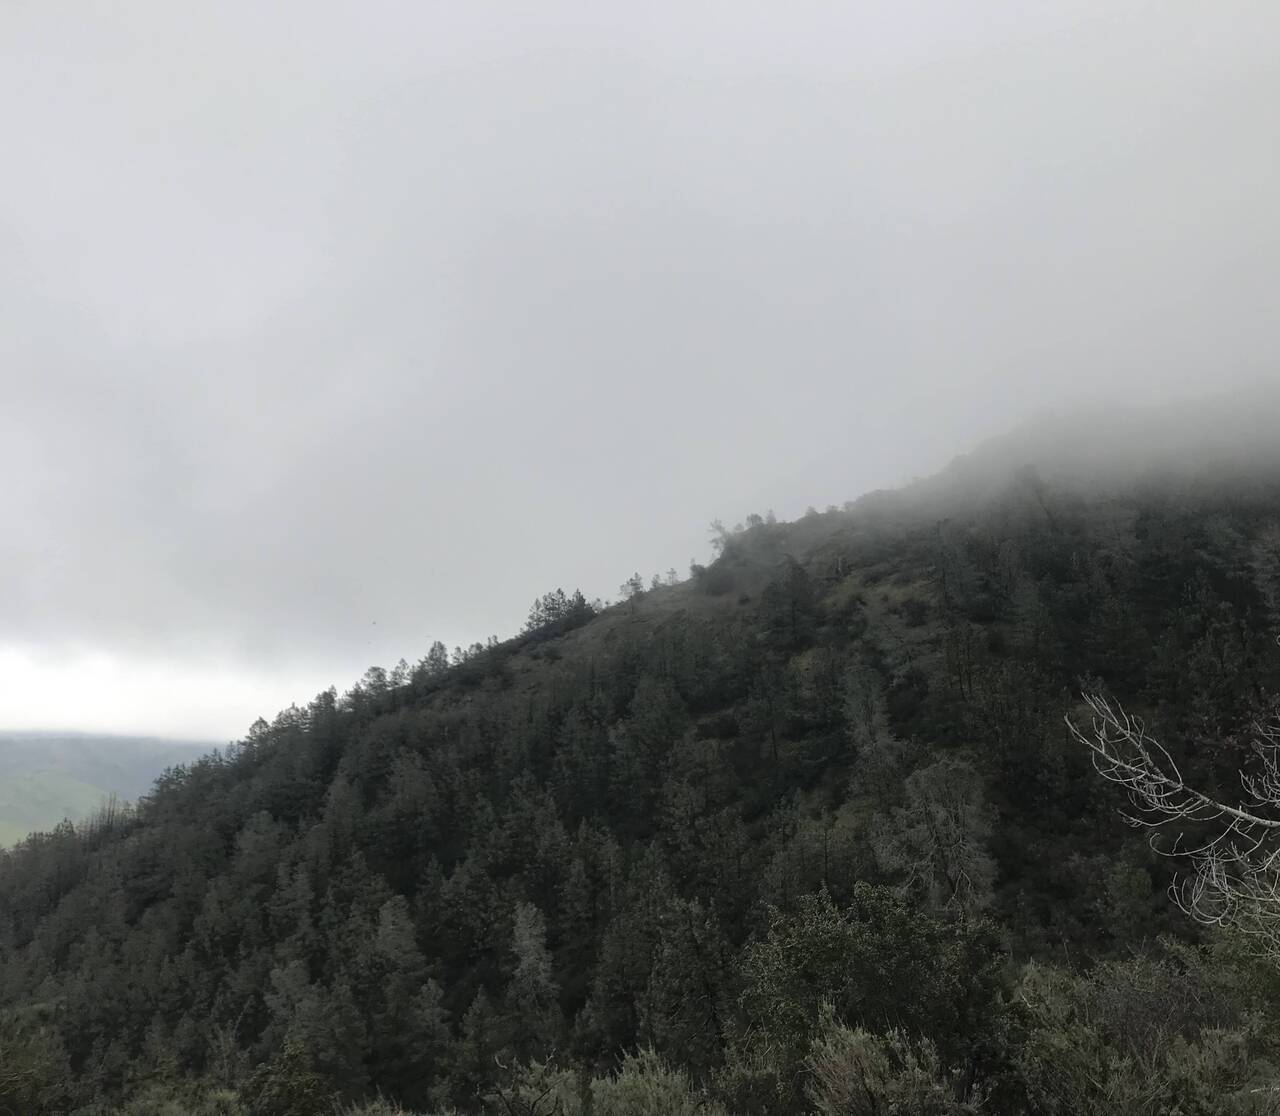 A tree-covered hillside disappears into the clouds